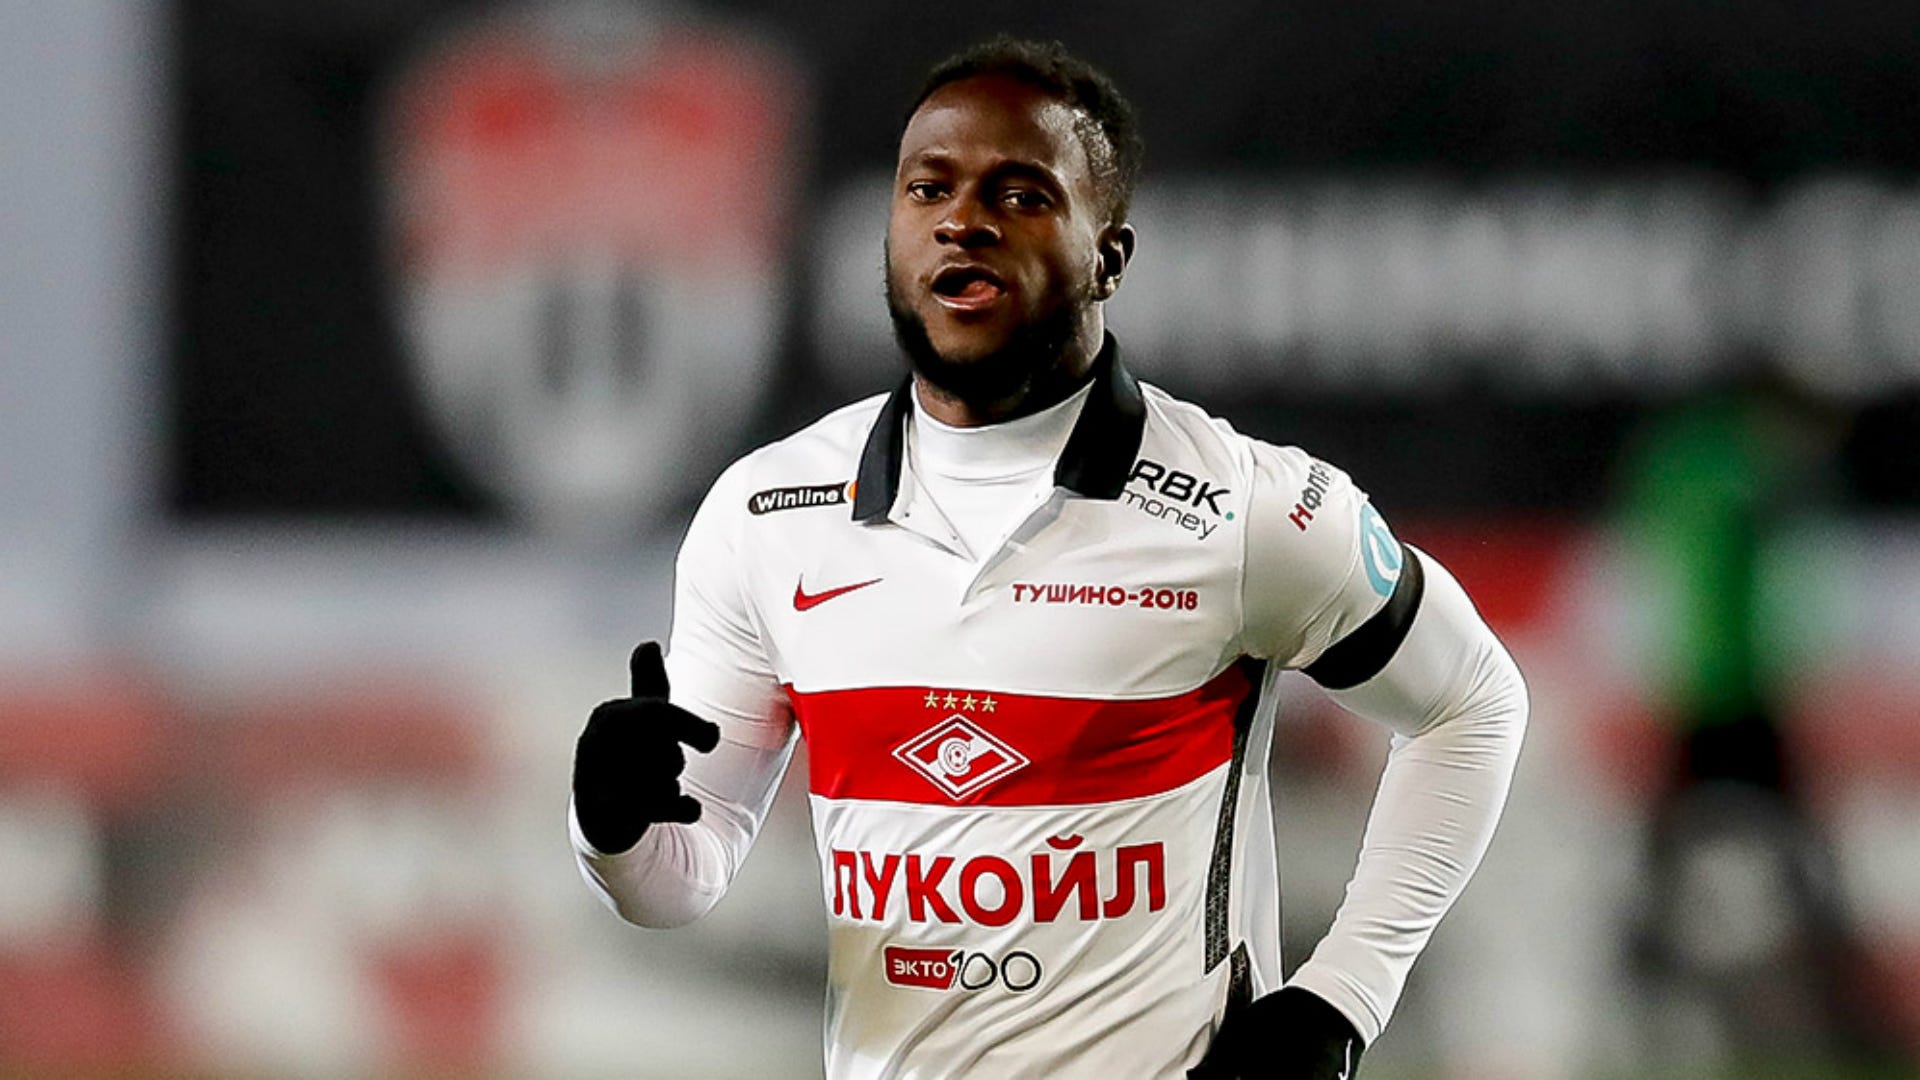 Moses scores for Spartak Moscow a day after leaving Chelsea